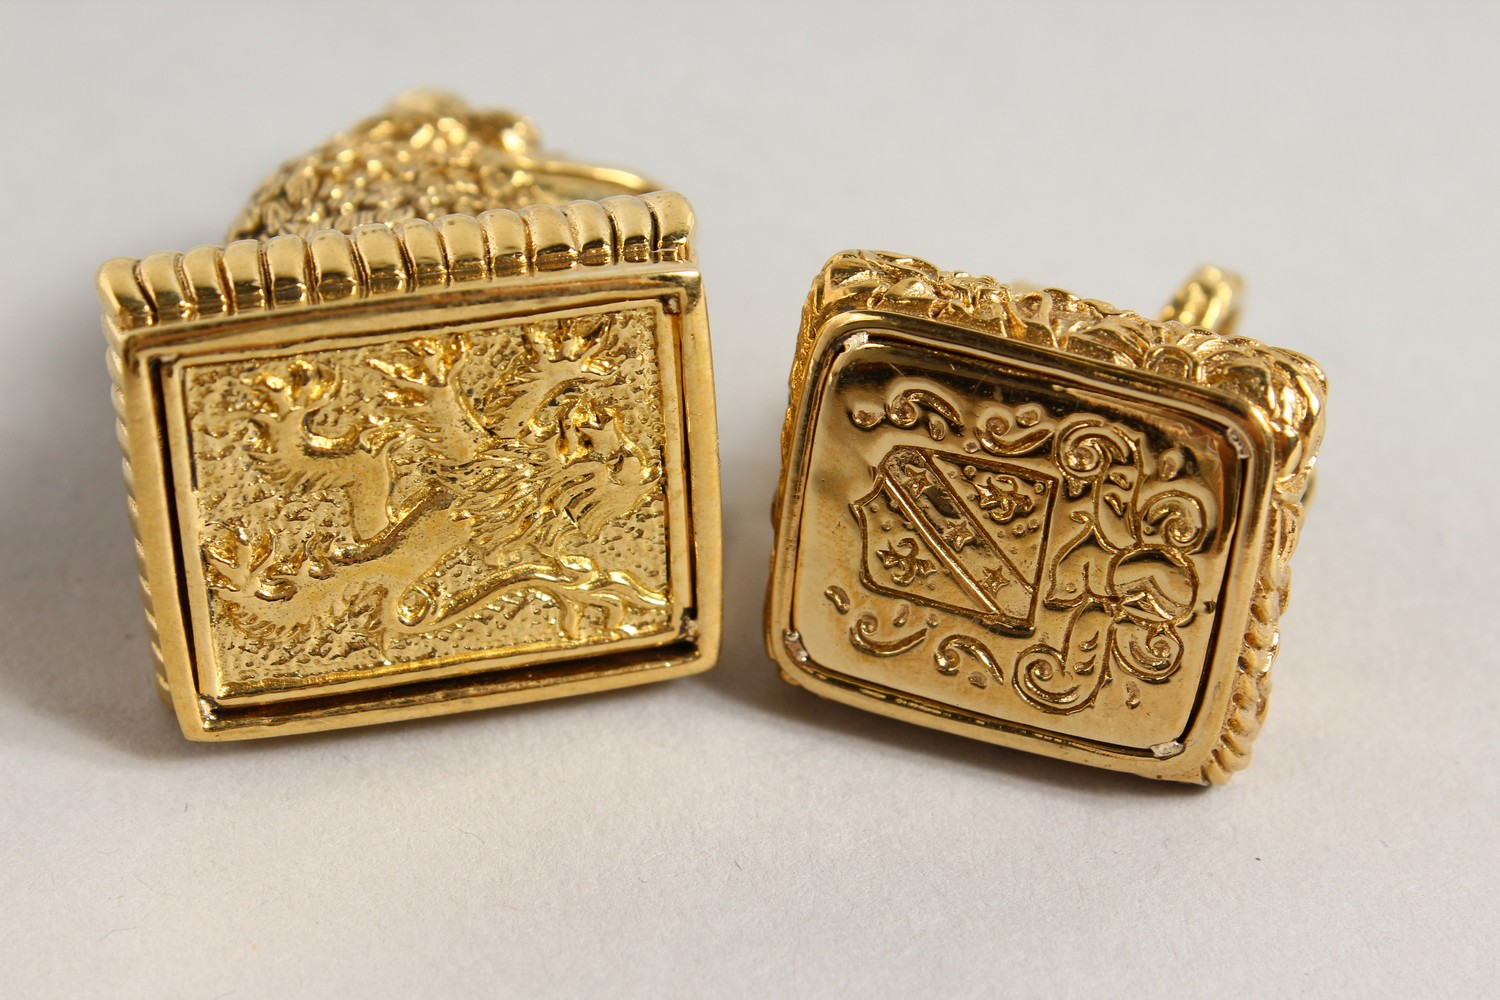 TWO SILVER GILT FOBS. - Image 3 of 3